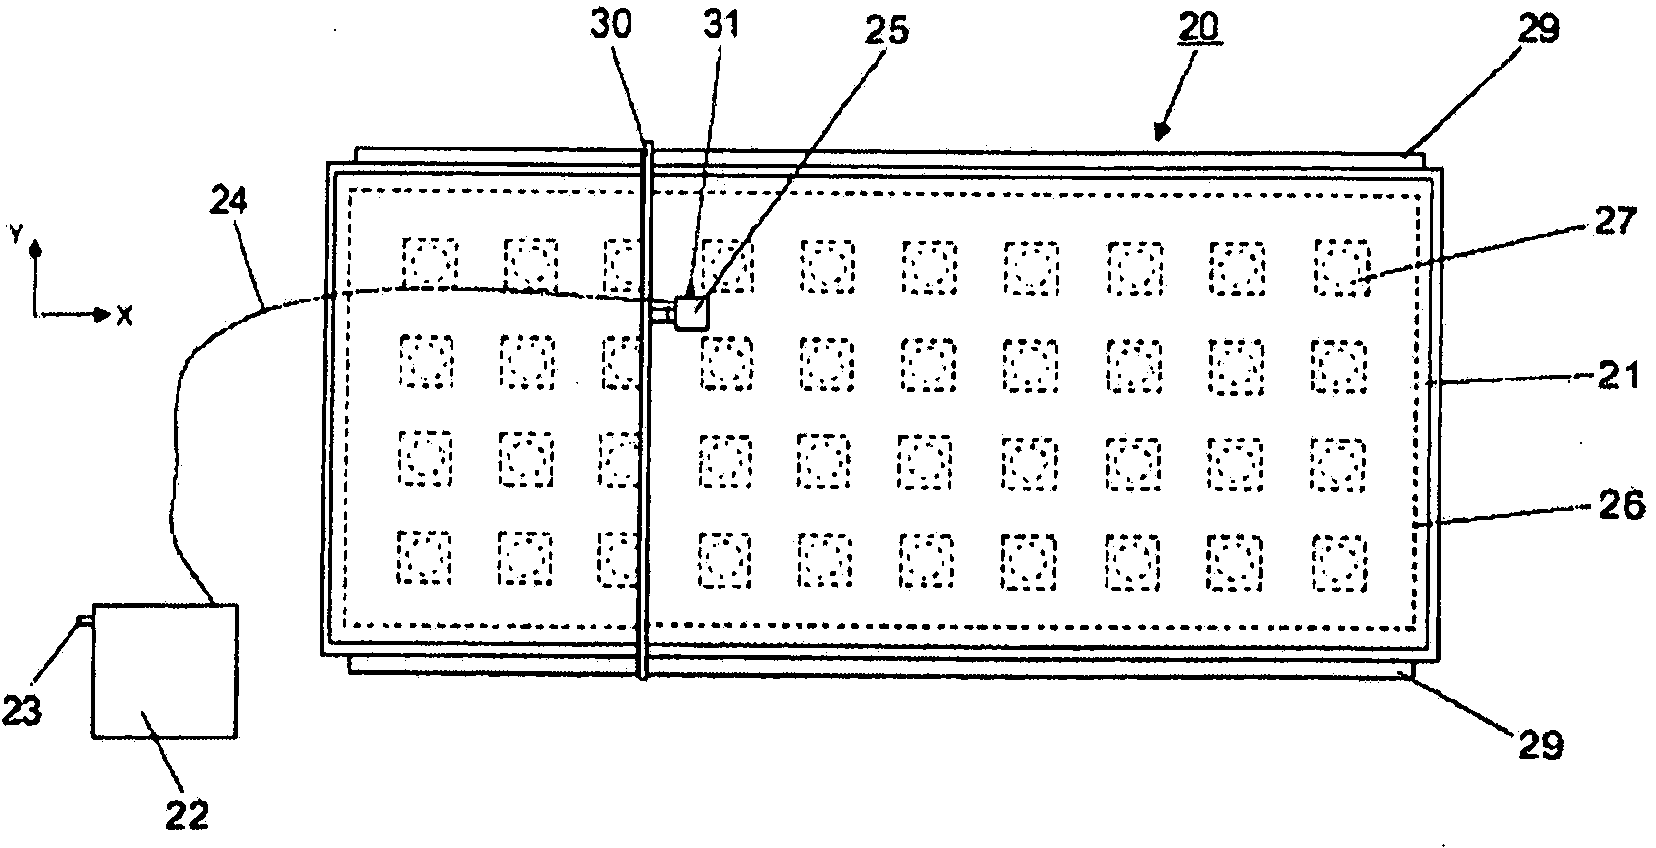 Method for producing a surface structure using a water-jet device